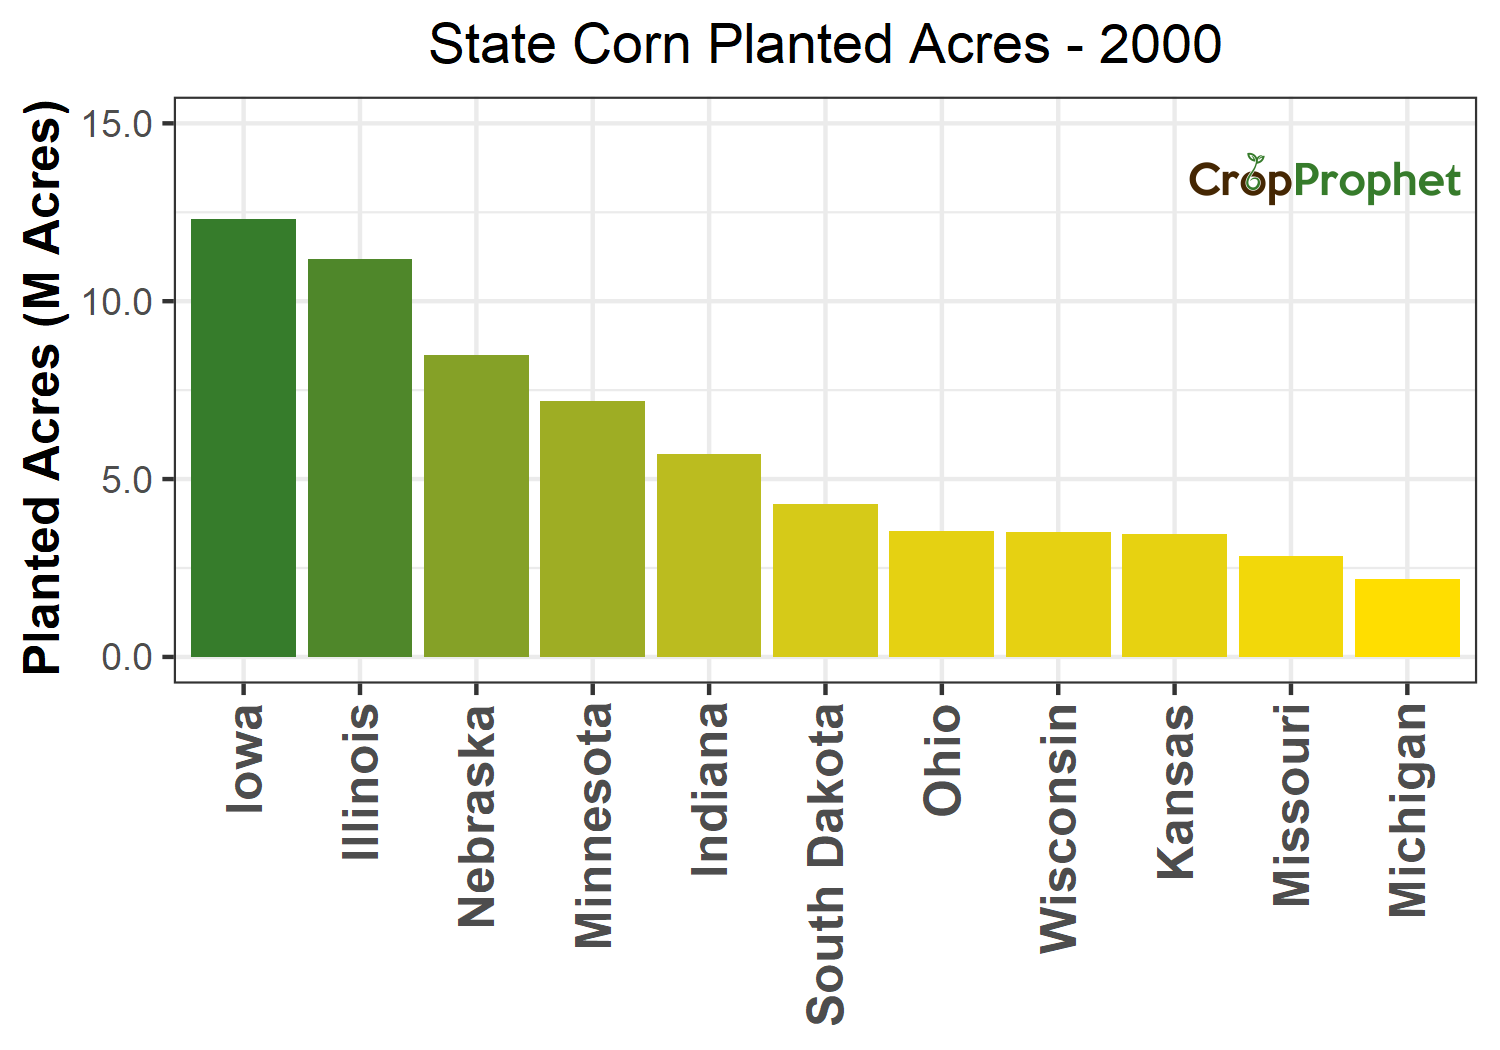 Corn Production by State - 2000 Rankings